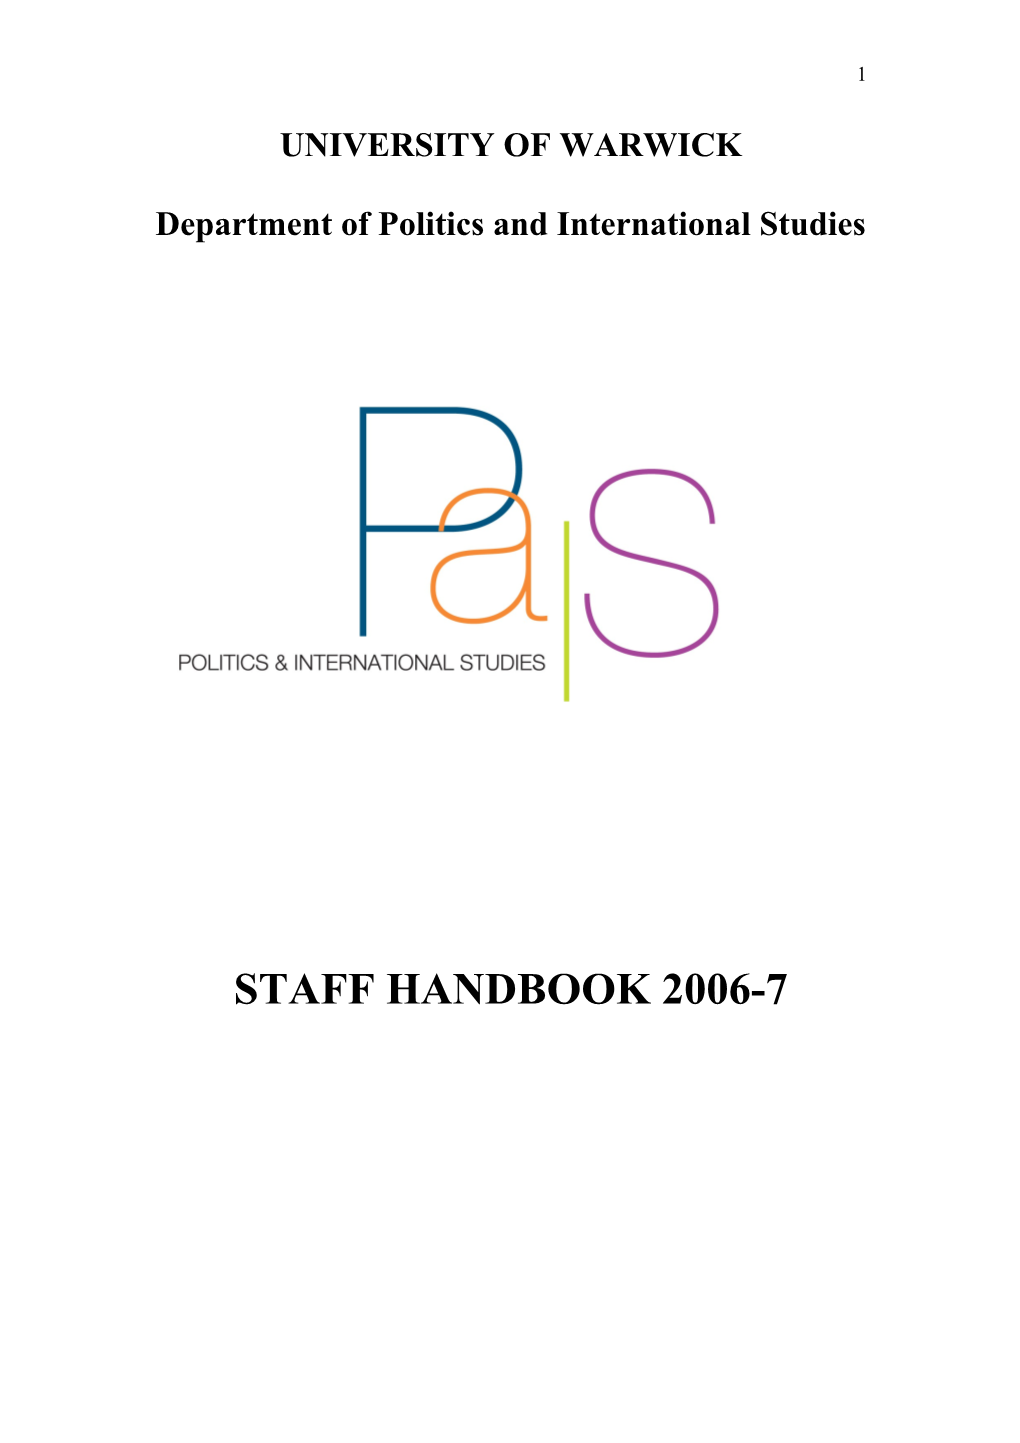 This Academic Staff Handbook Is Intended to Provide You with the Information That You Will